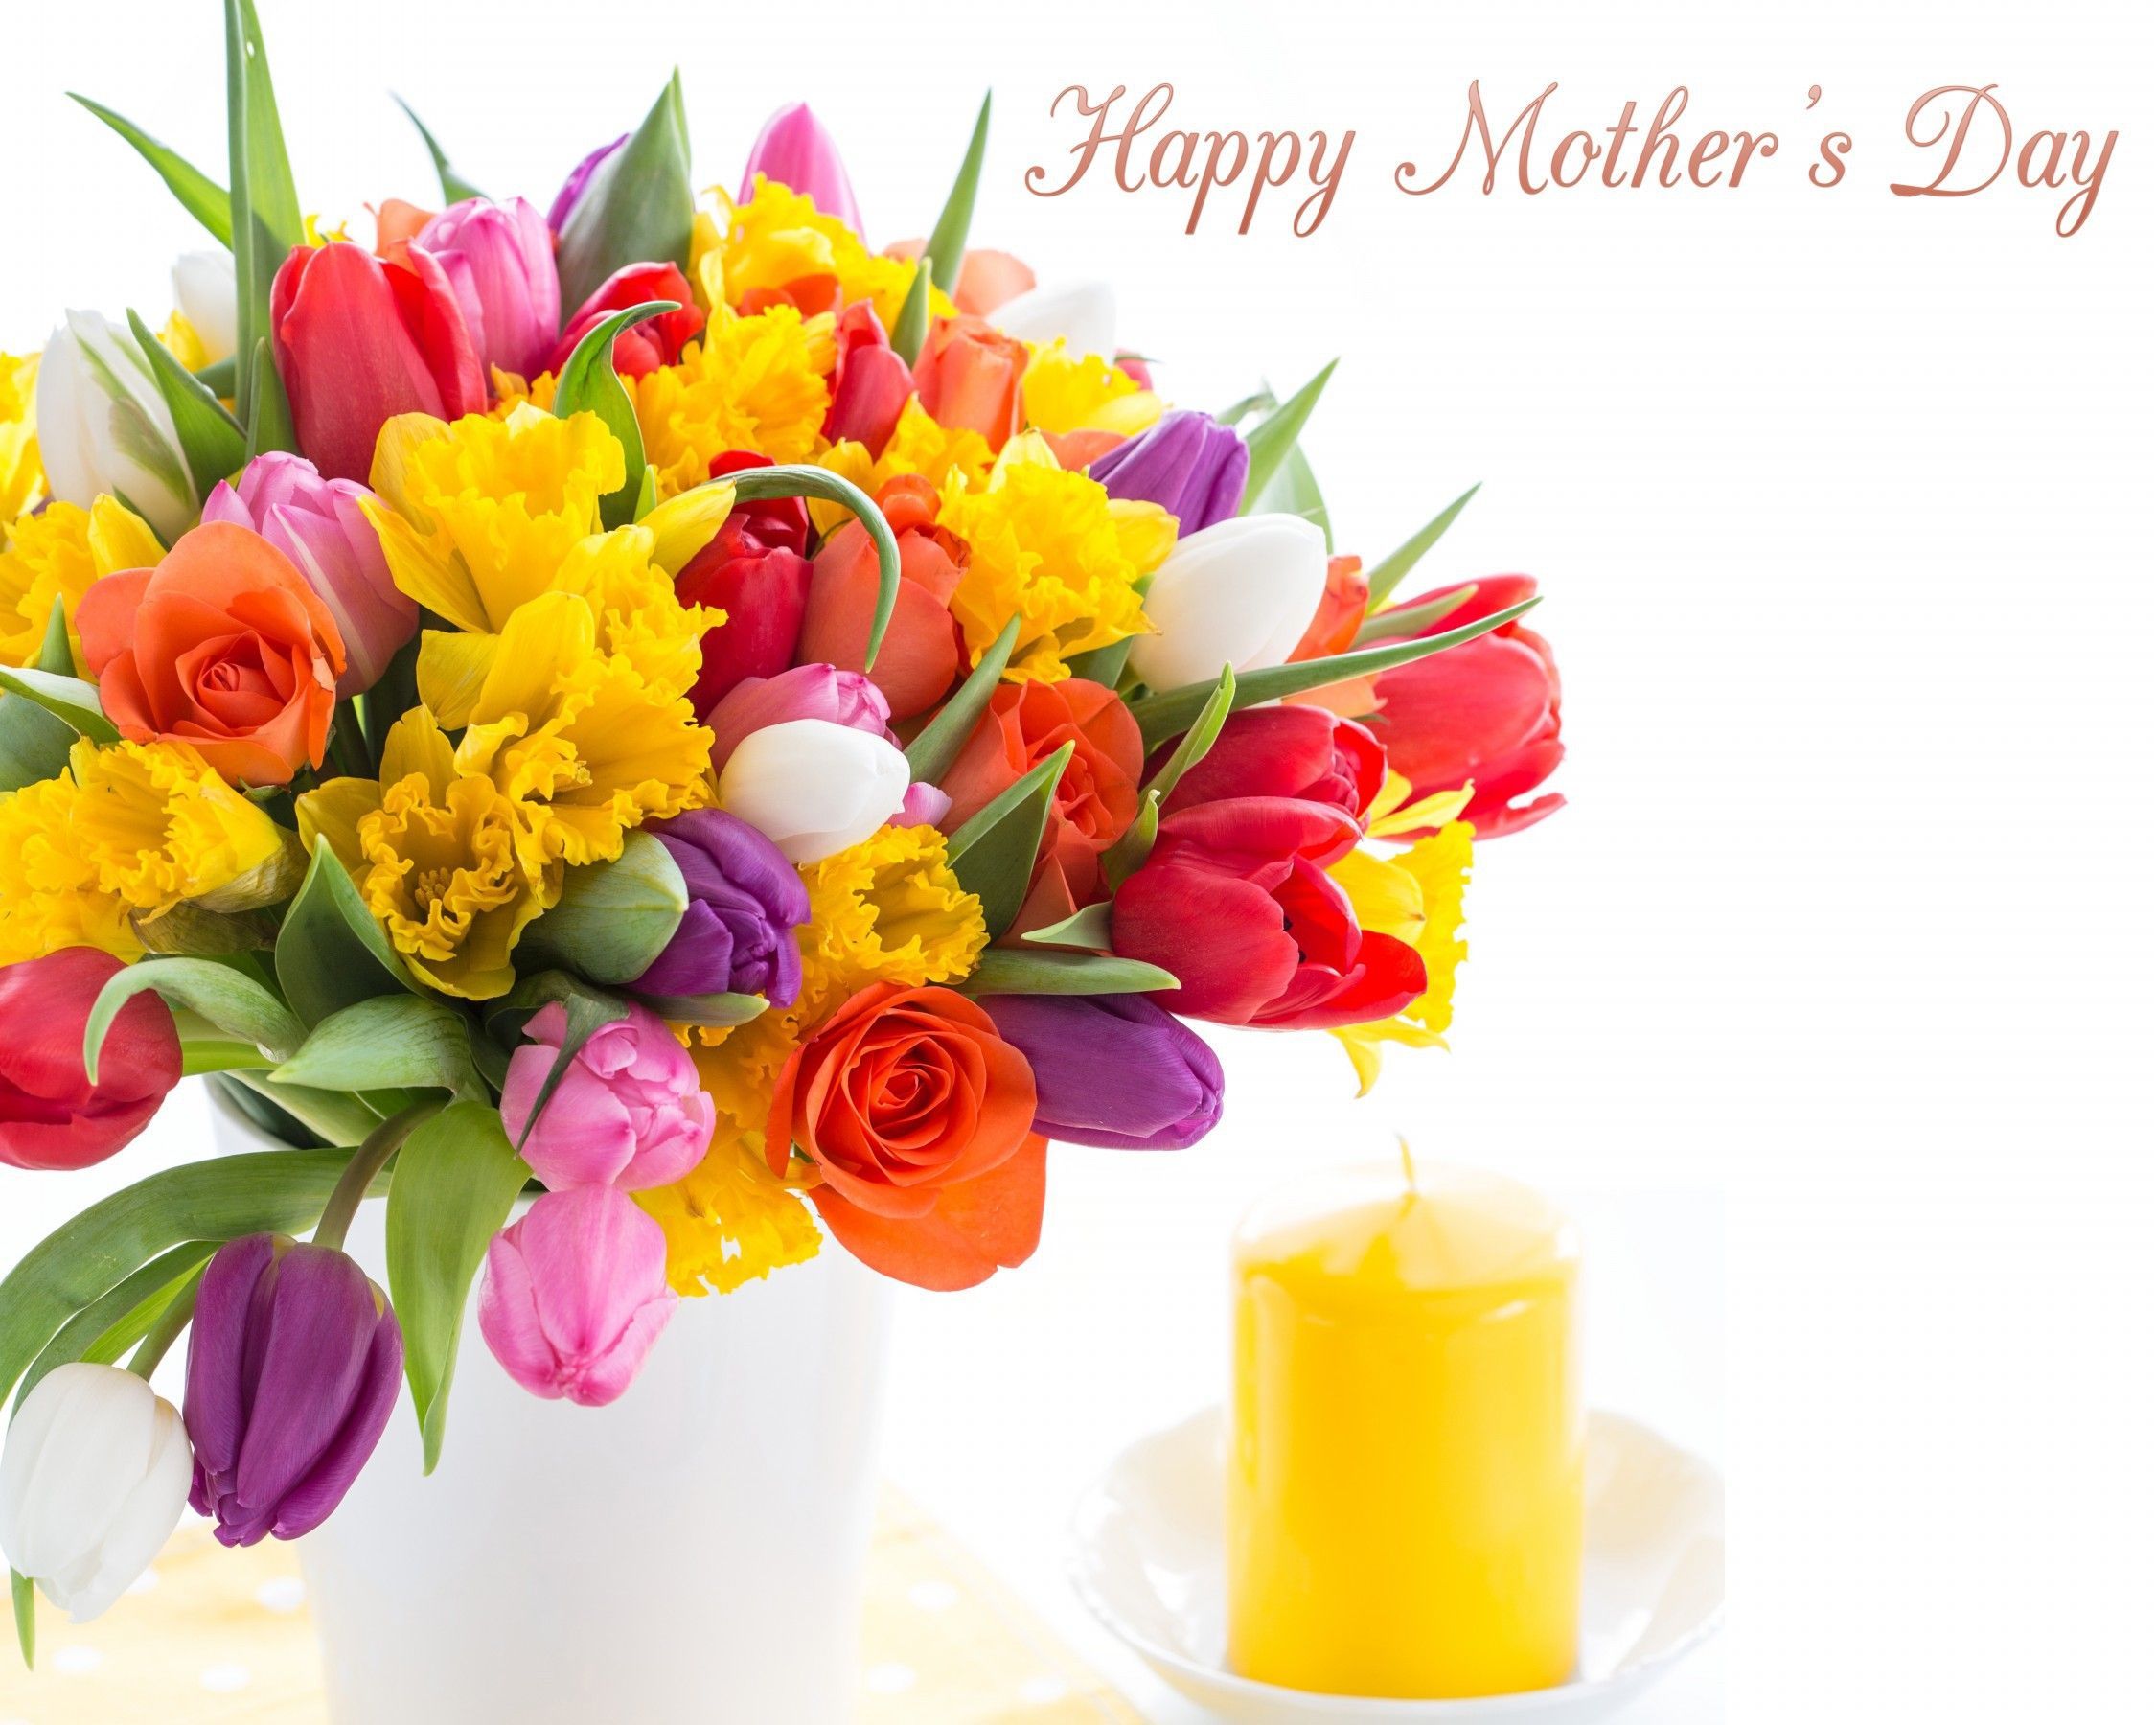 Happy Mothers Day Wishes Tulips Flowers 4k Widescreen Wallpaper. Mothers Day Flowers, Happy Mothers Day Image, Happy Mothers Day